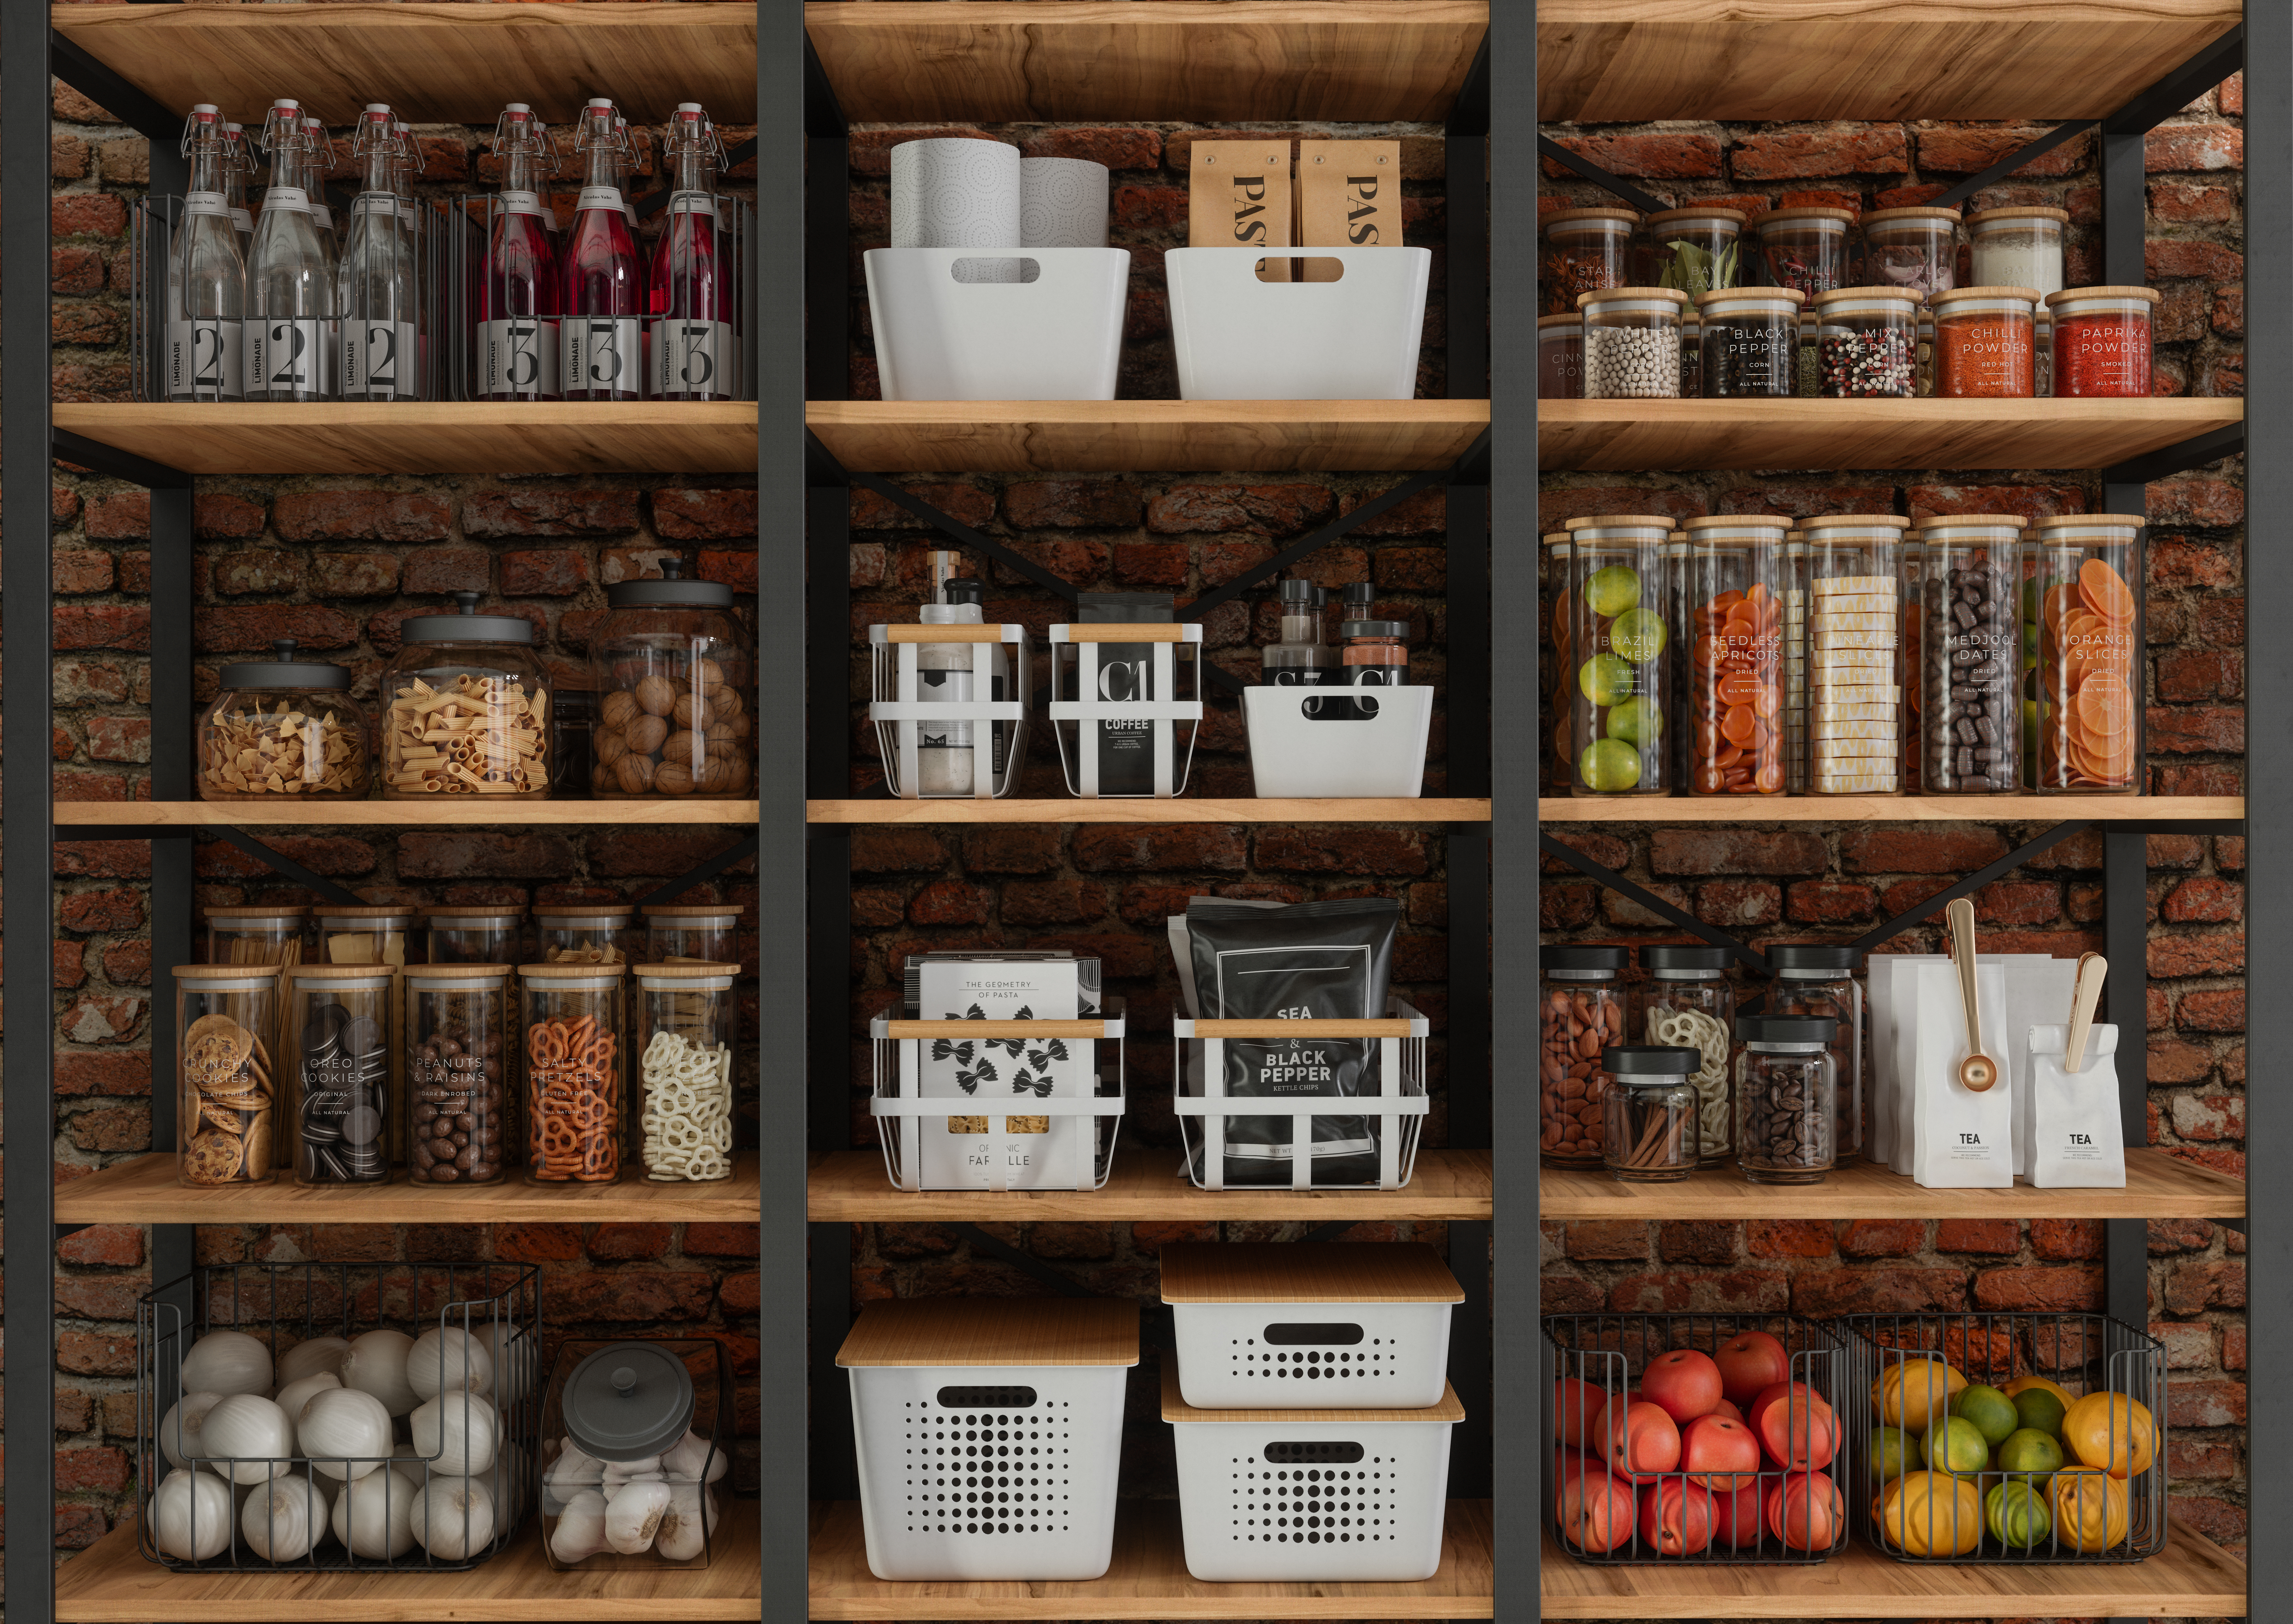 Three ways to have extra storage in your kitchen - even if it's a tight squeeze